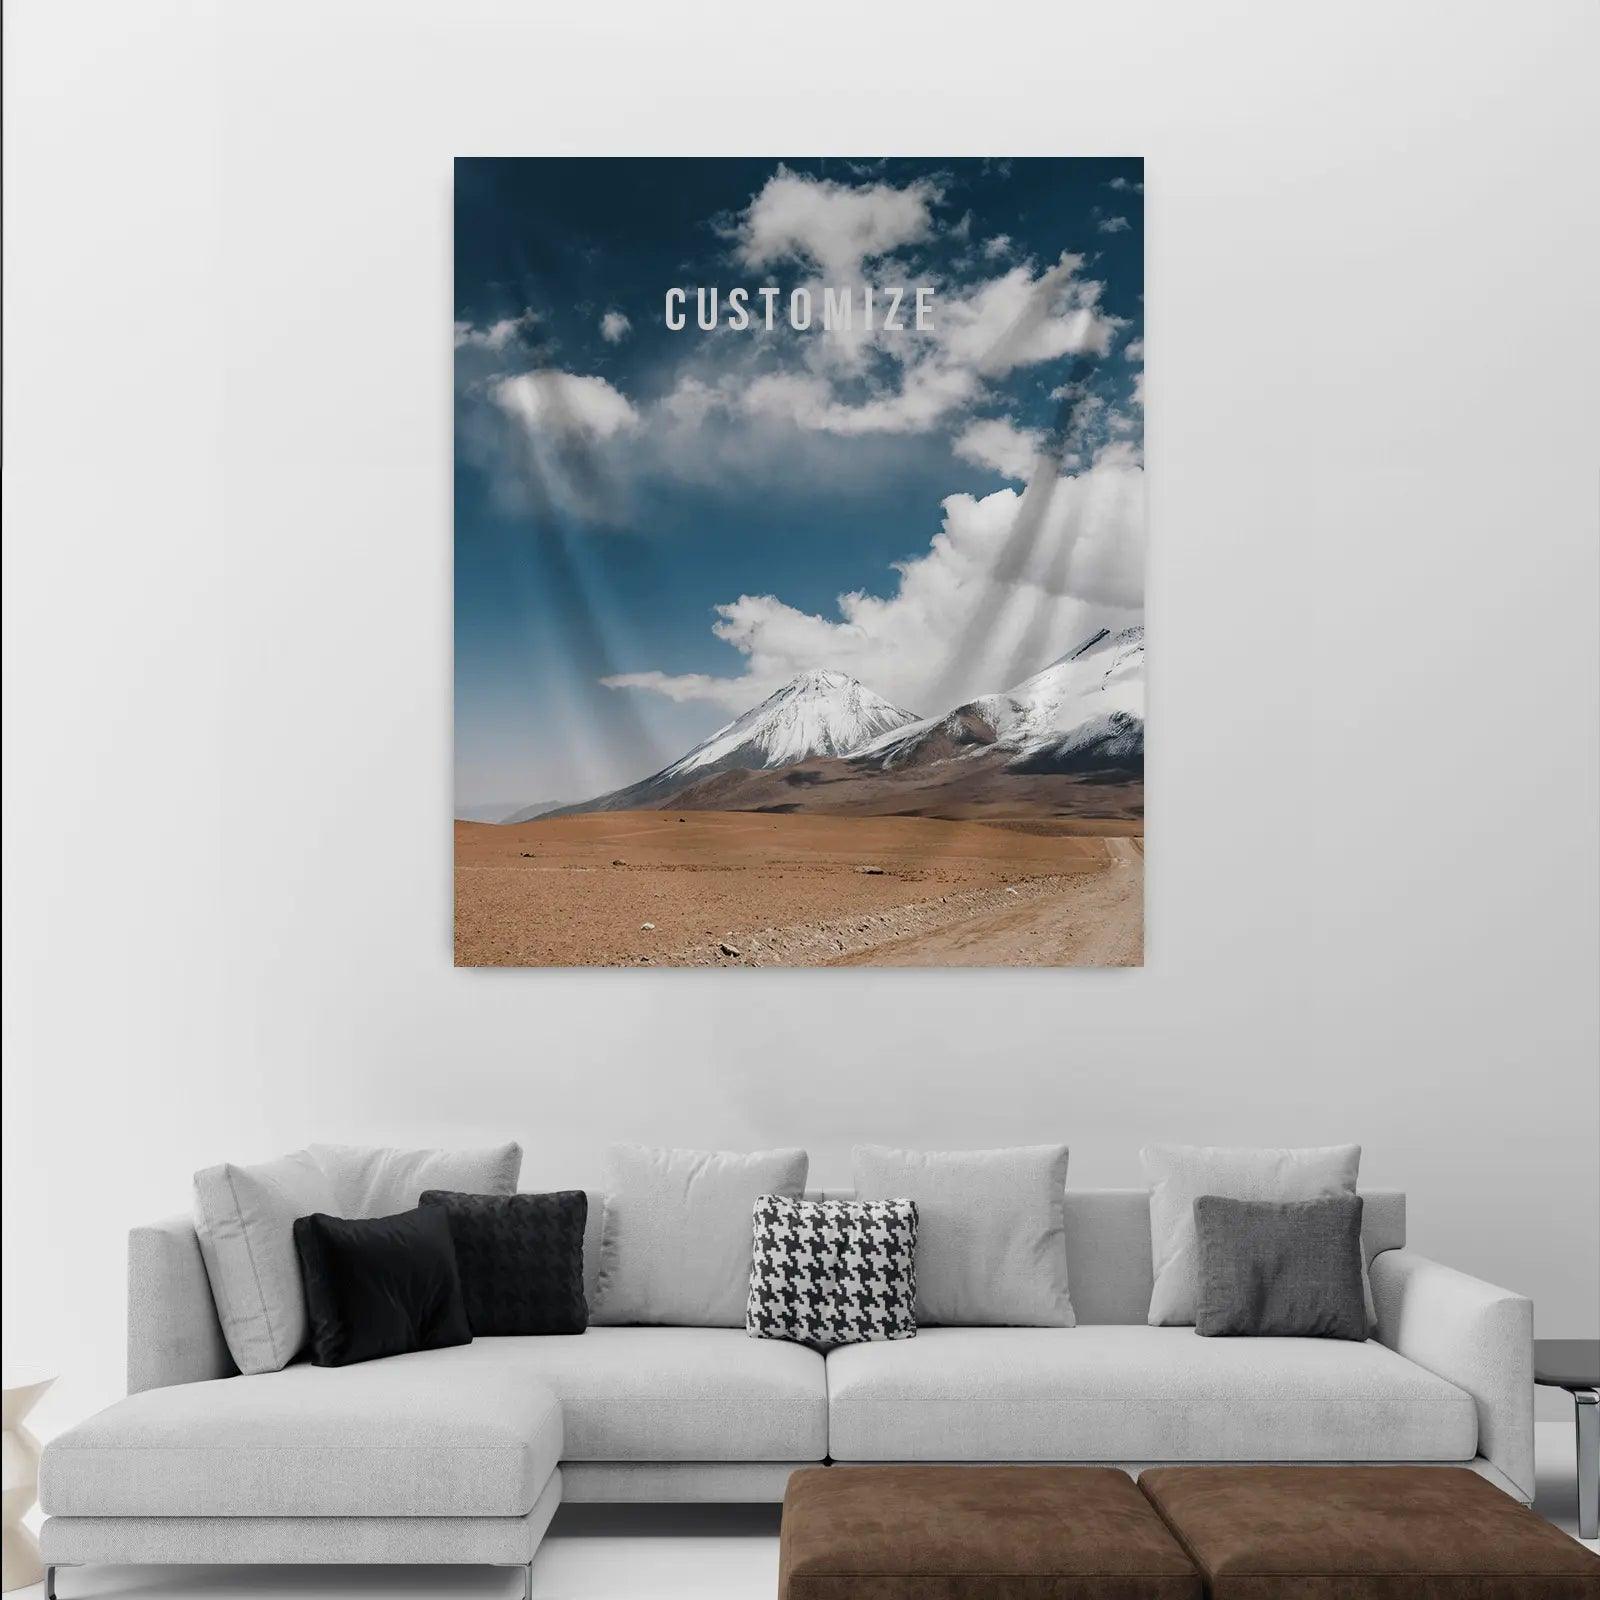 Wall Tapestry Tapestry 68-x-80-Vertical 47.95 Qstomize.com